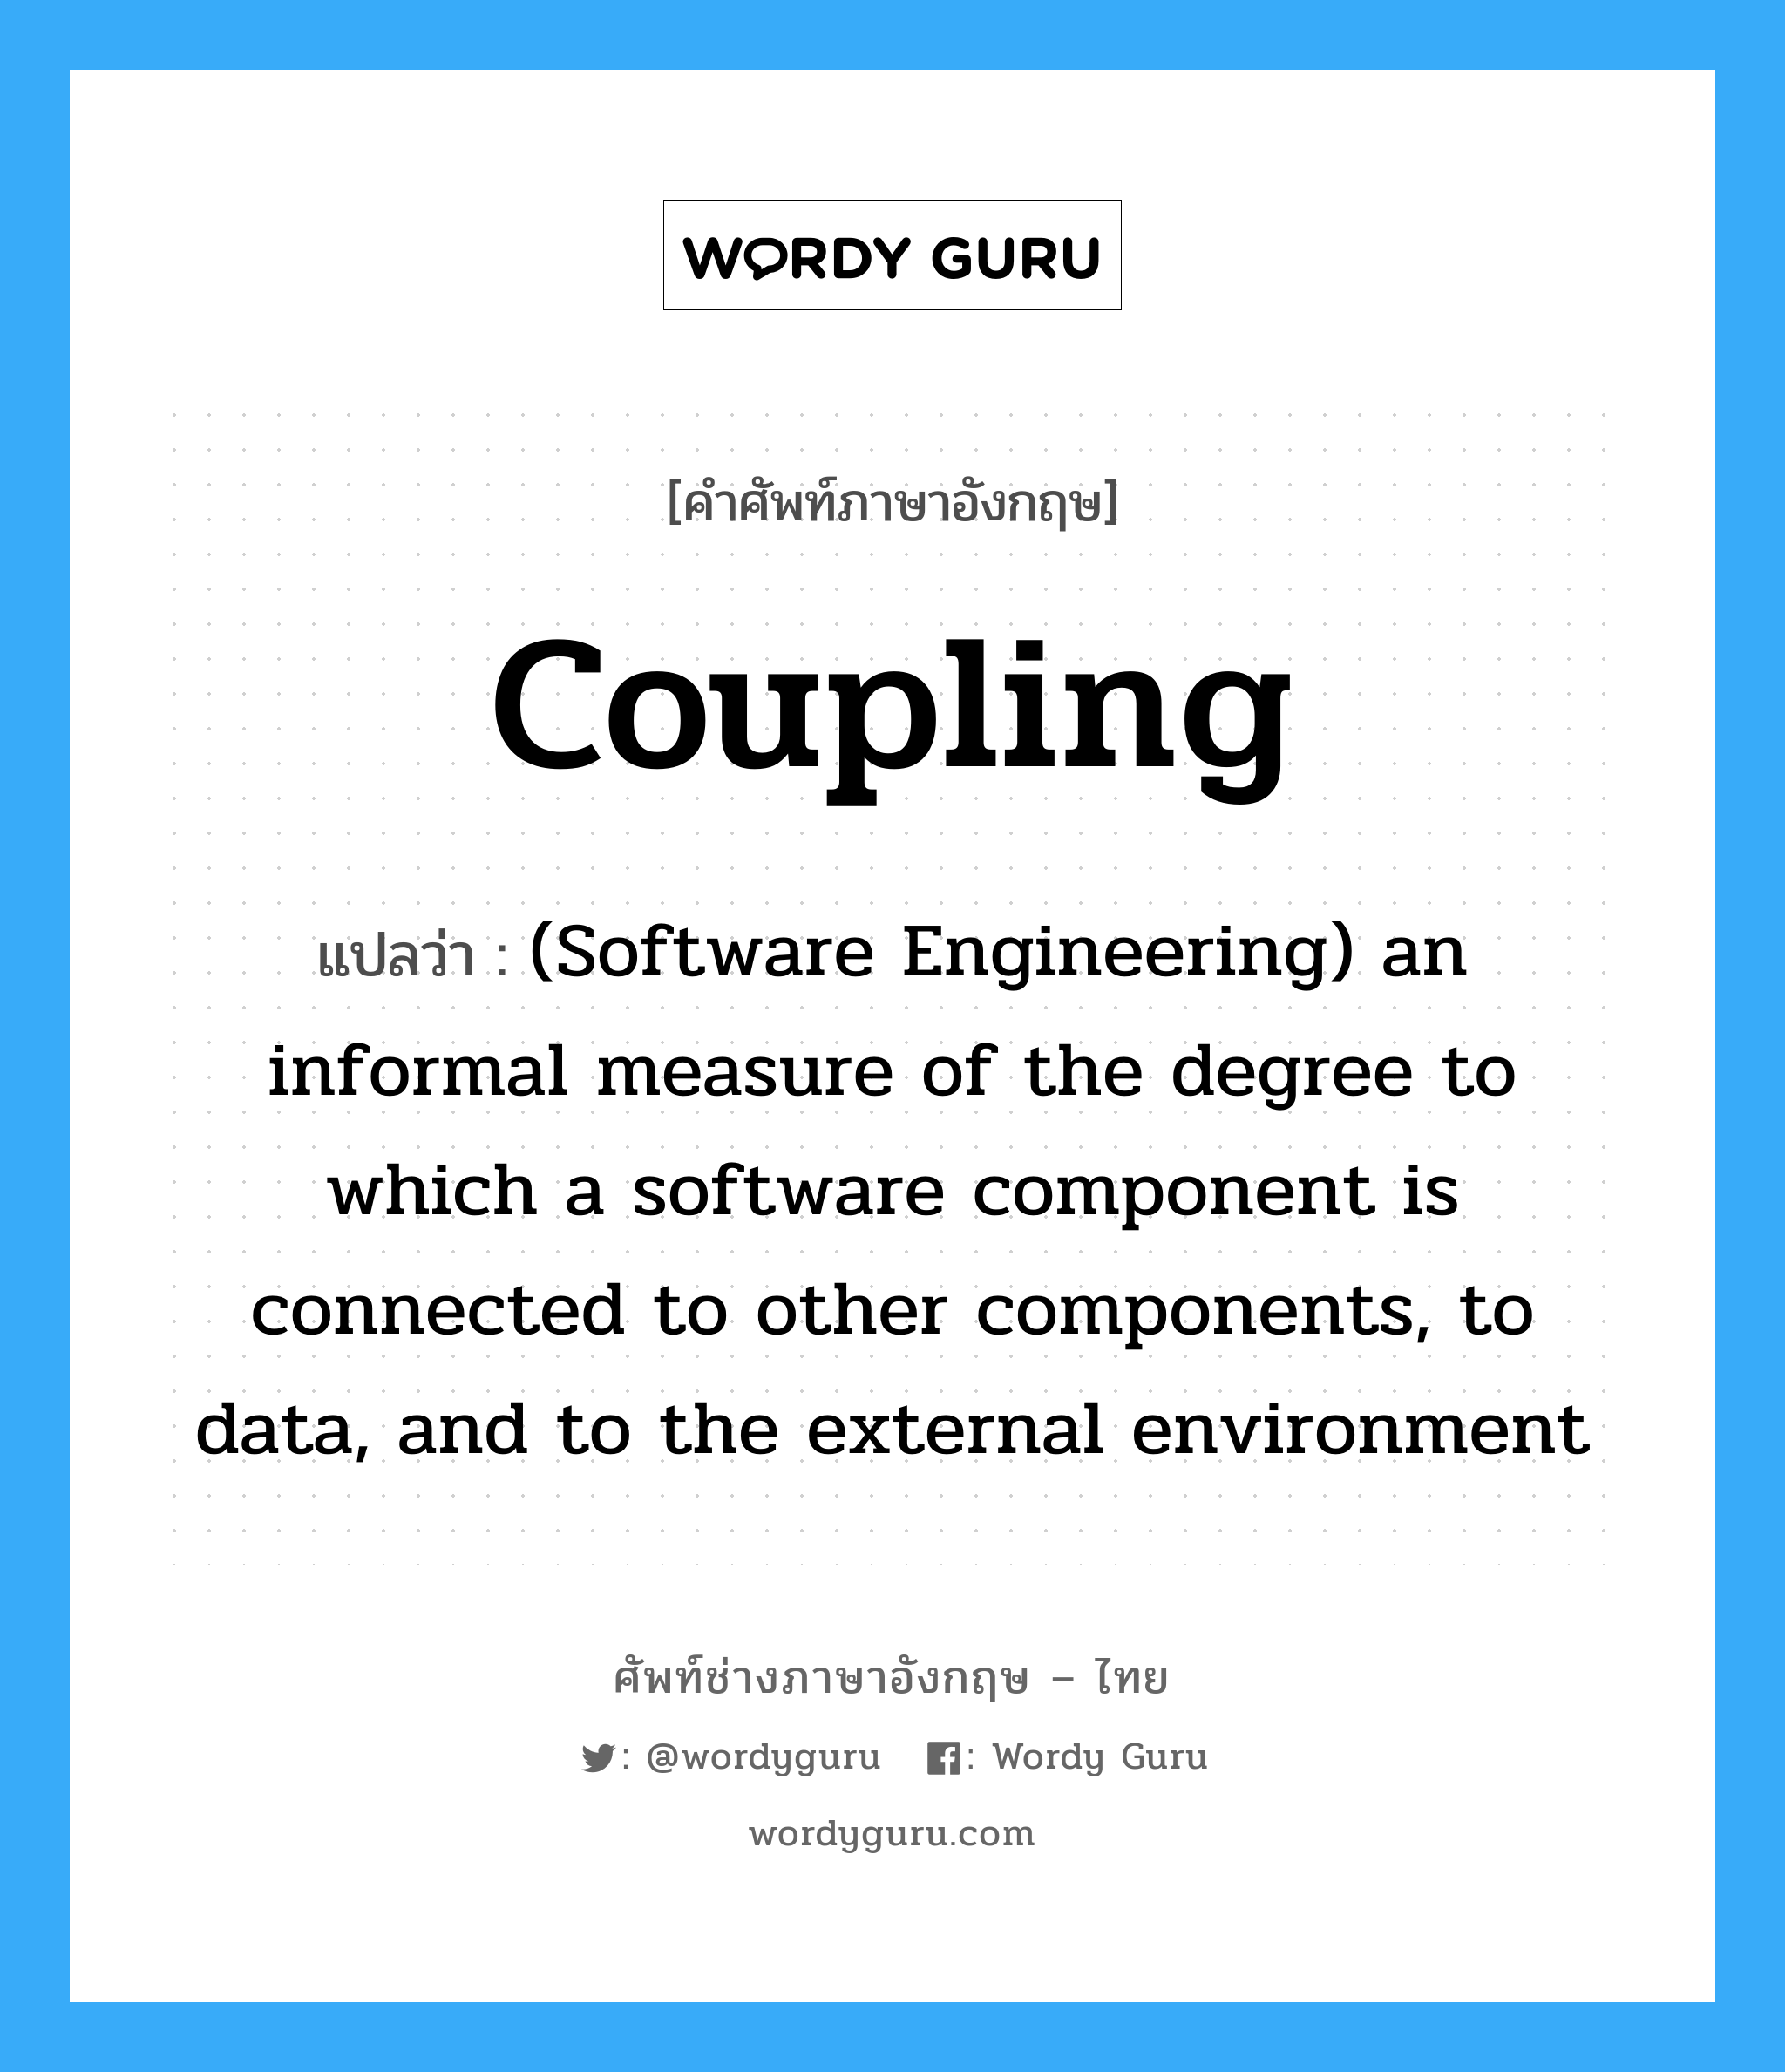 Coupling แปลว่า?, คำศัพท์ช่างภาษาอังกฤษ - ไทย Coupling คำศัพท์ภาษาอังกฤษ Coupling แปลว่า (Software Engineering) an informal measure of the degree to which a software component is connected to other components, to data, and to the external environment